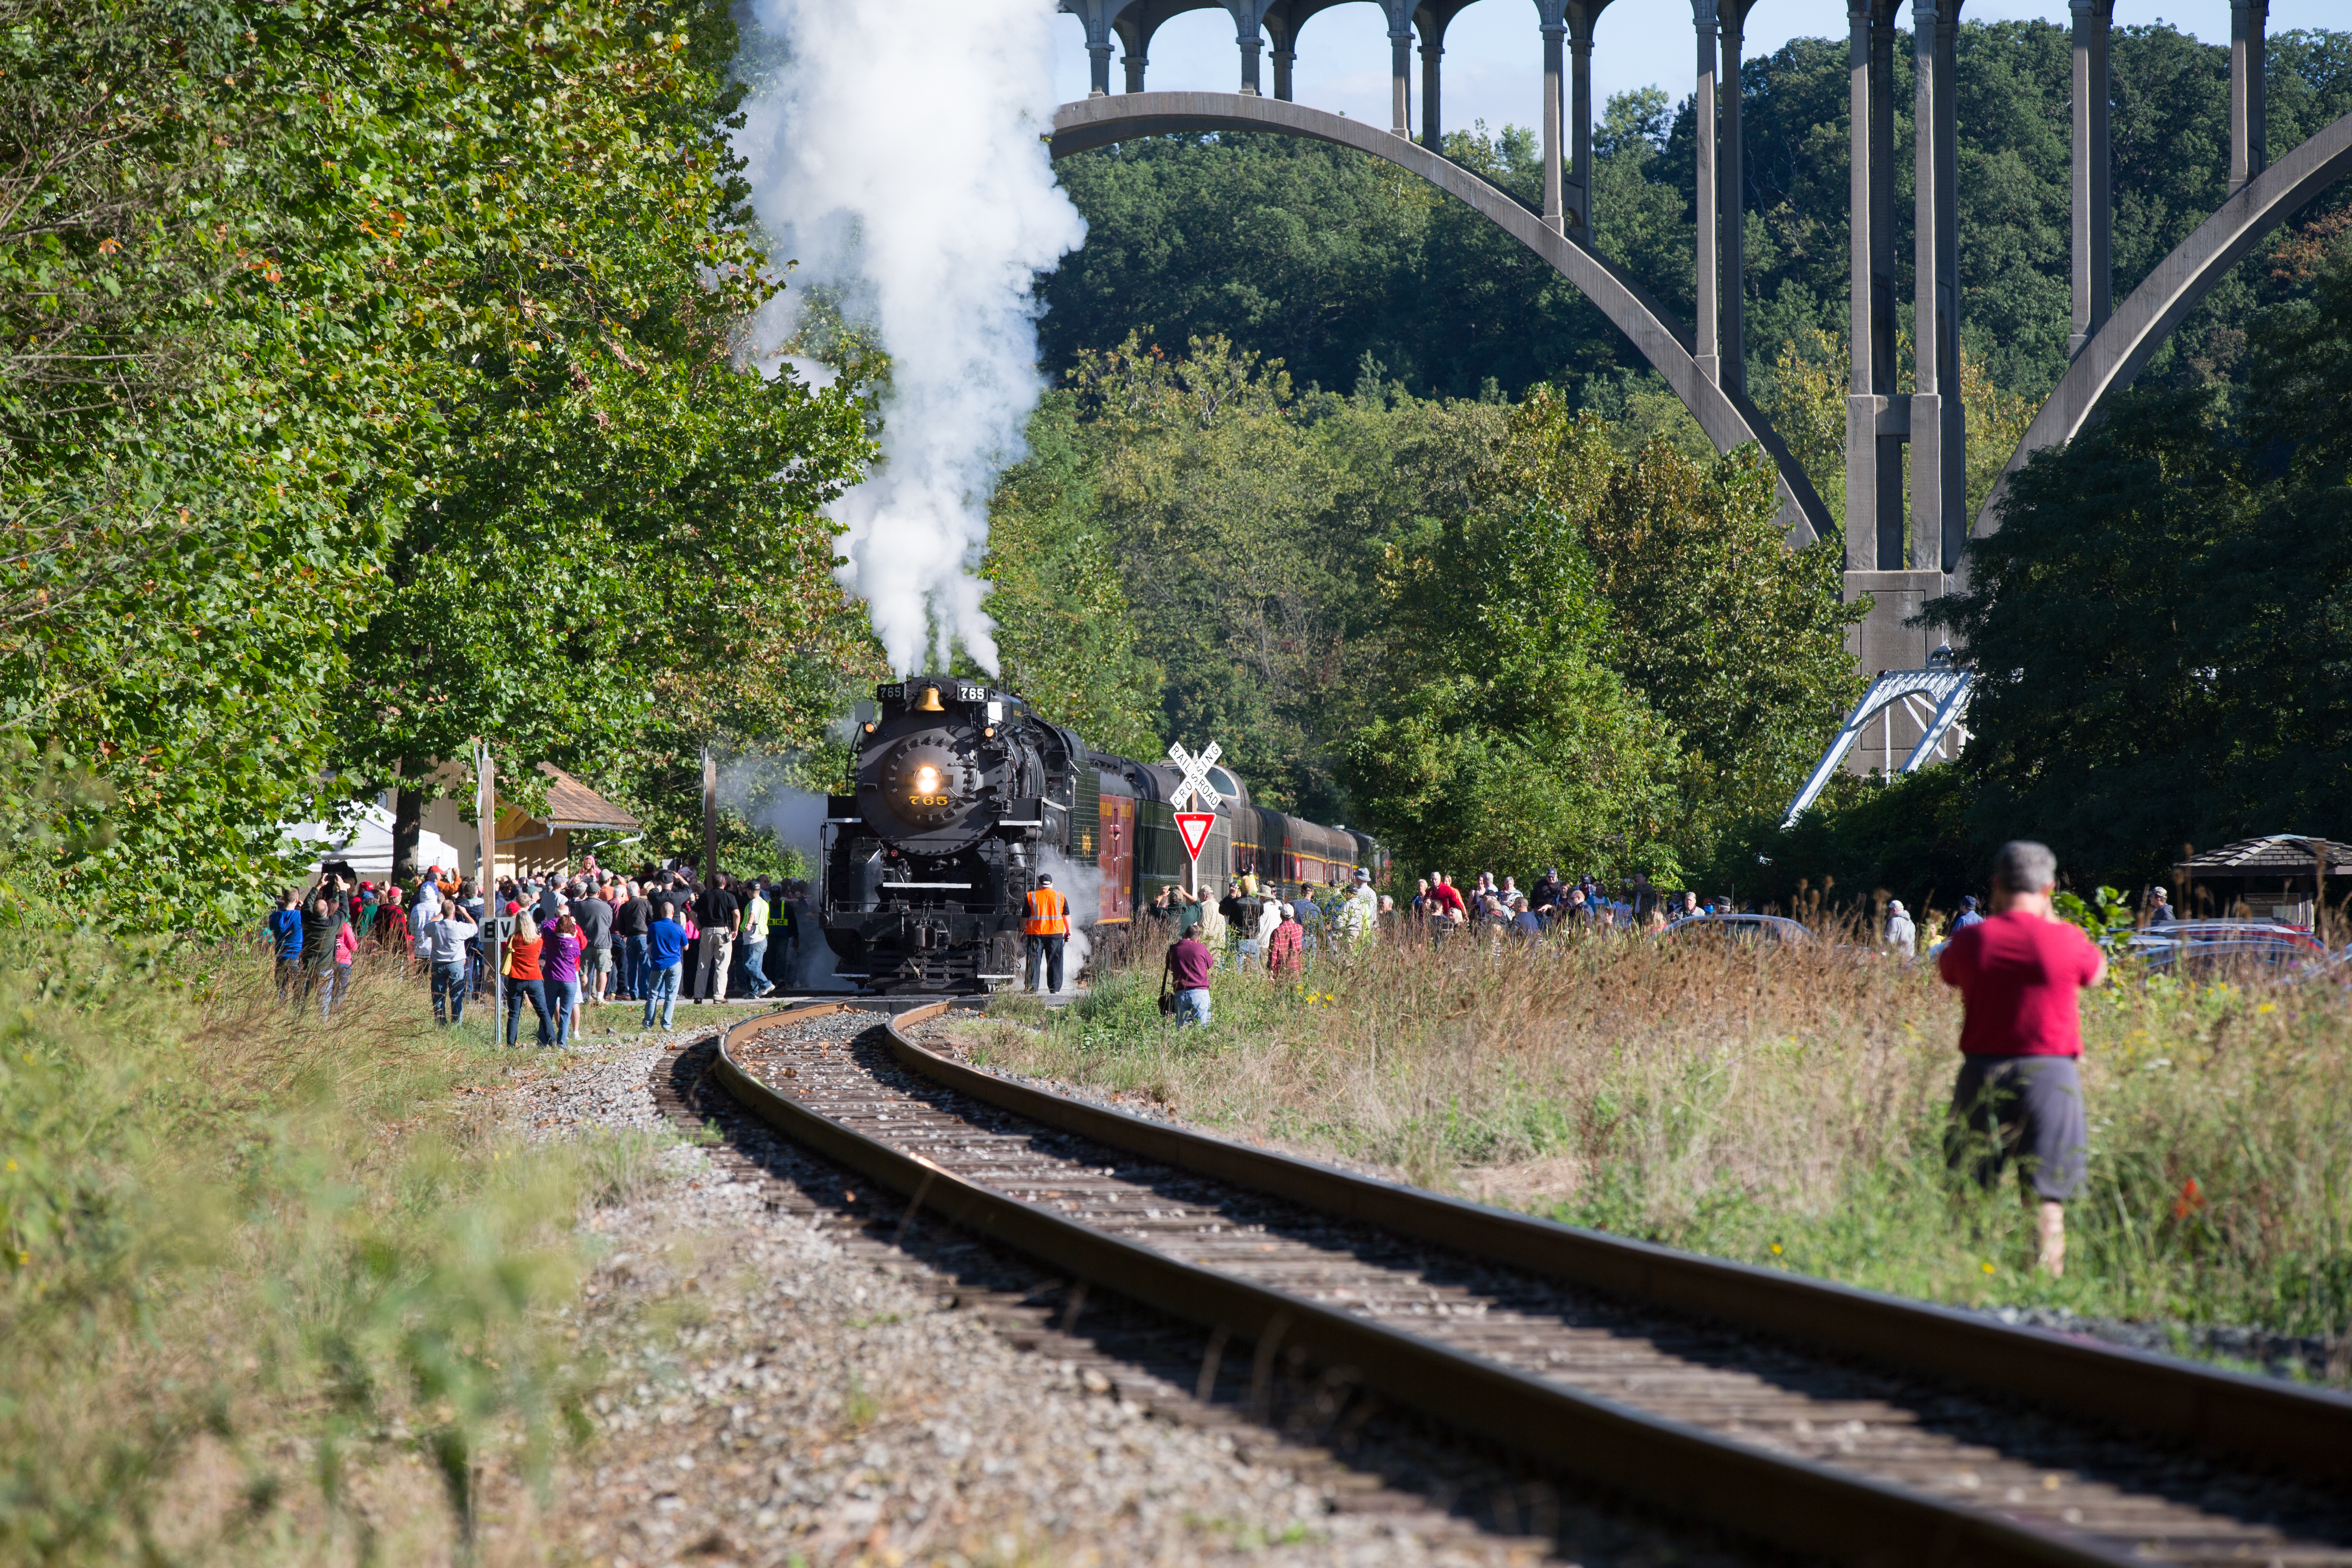 Steam engine approaches on railroad tracks surrounded by people and green foliage, bridge in background.